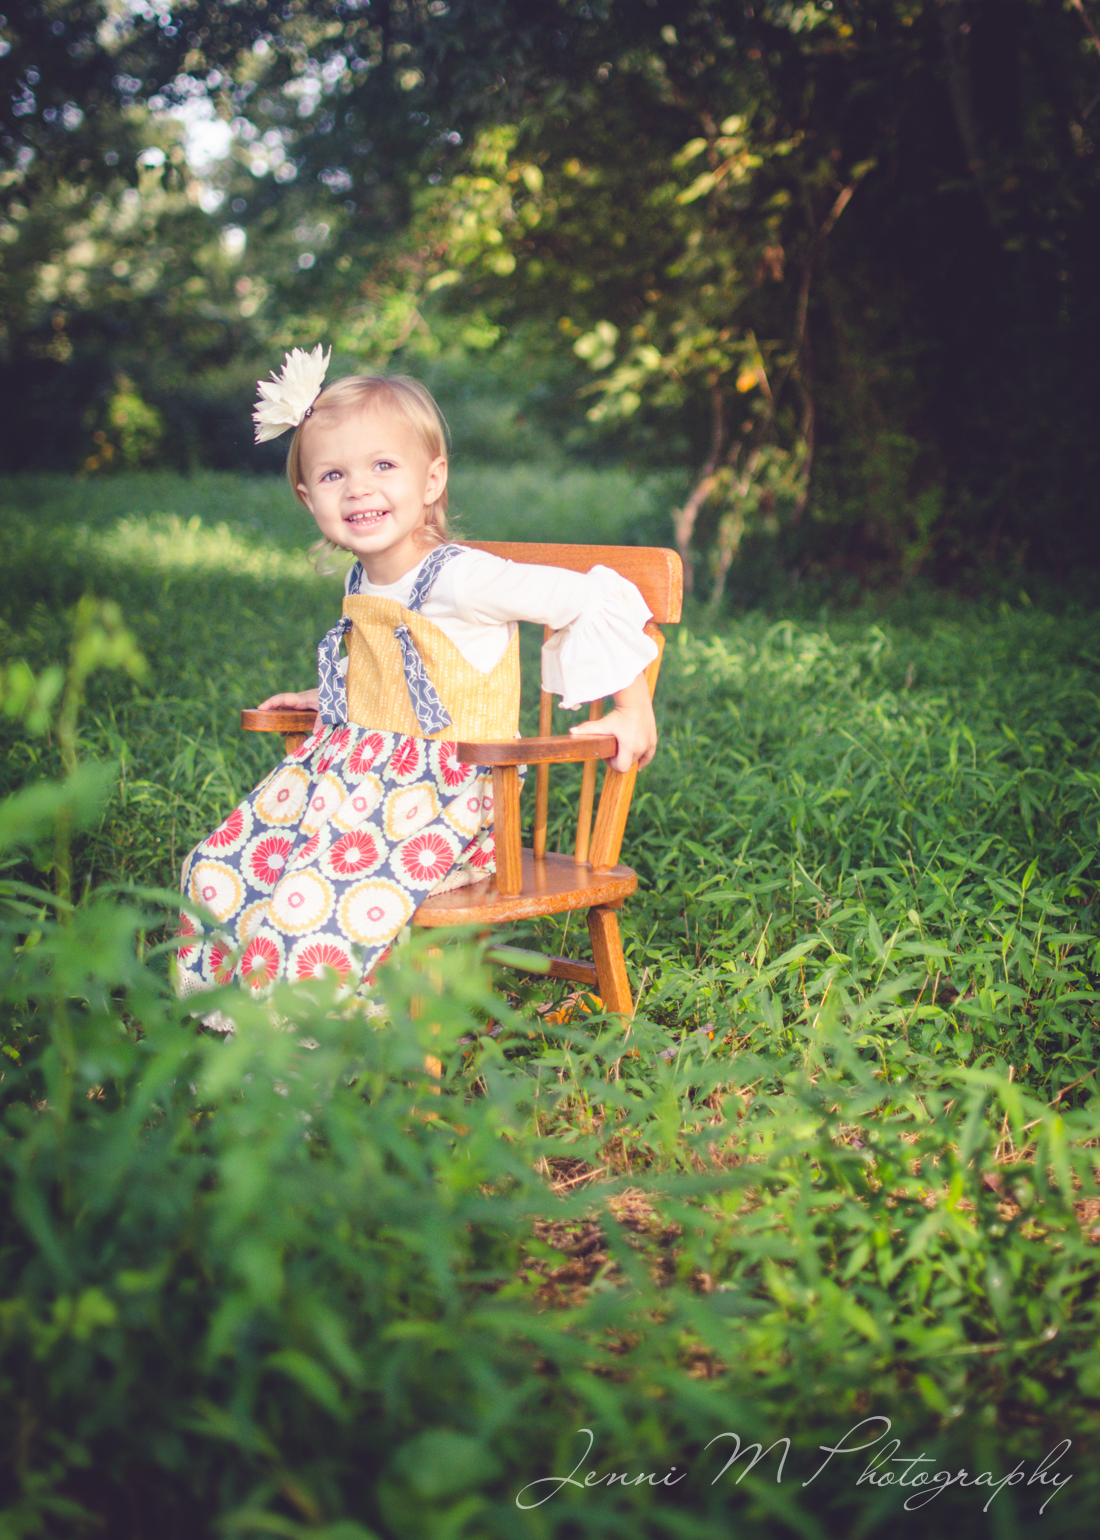 Jenni M Photography 2 year old birthday photography outdoor affordable natural-2